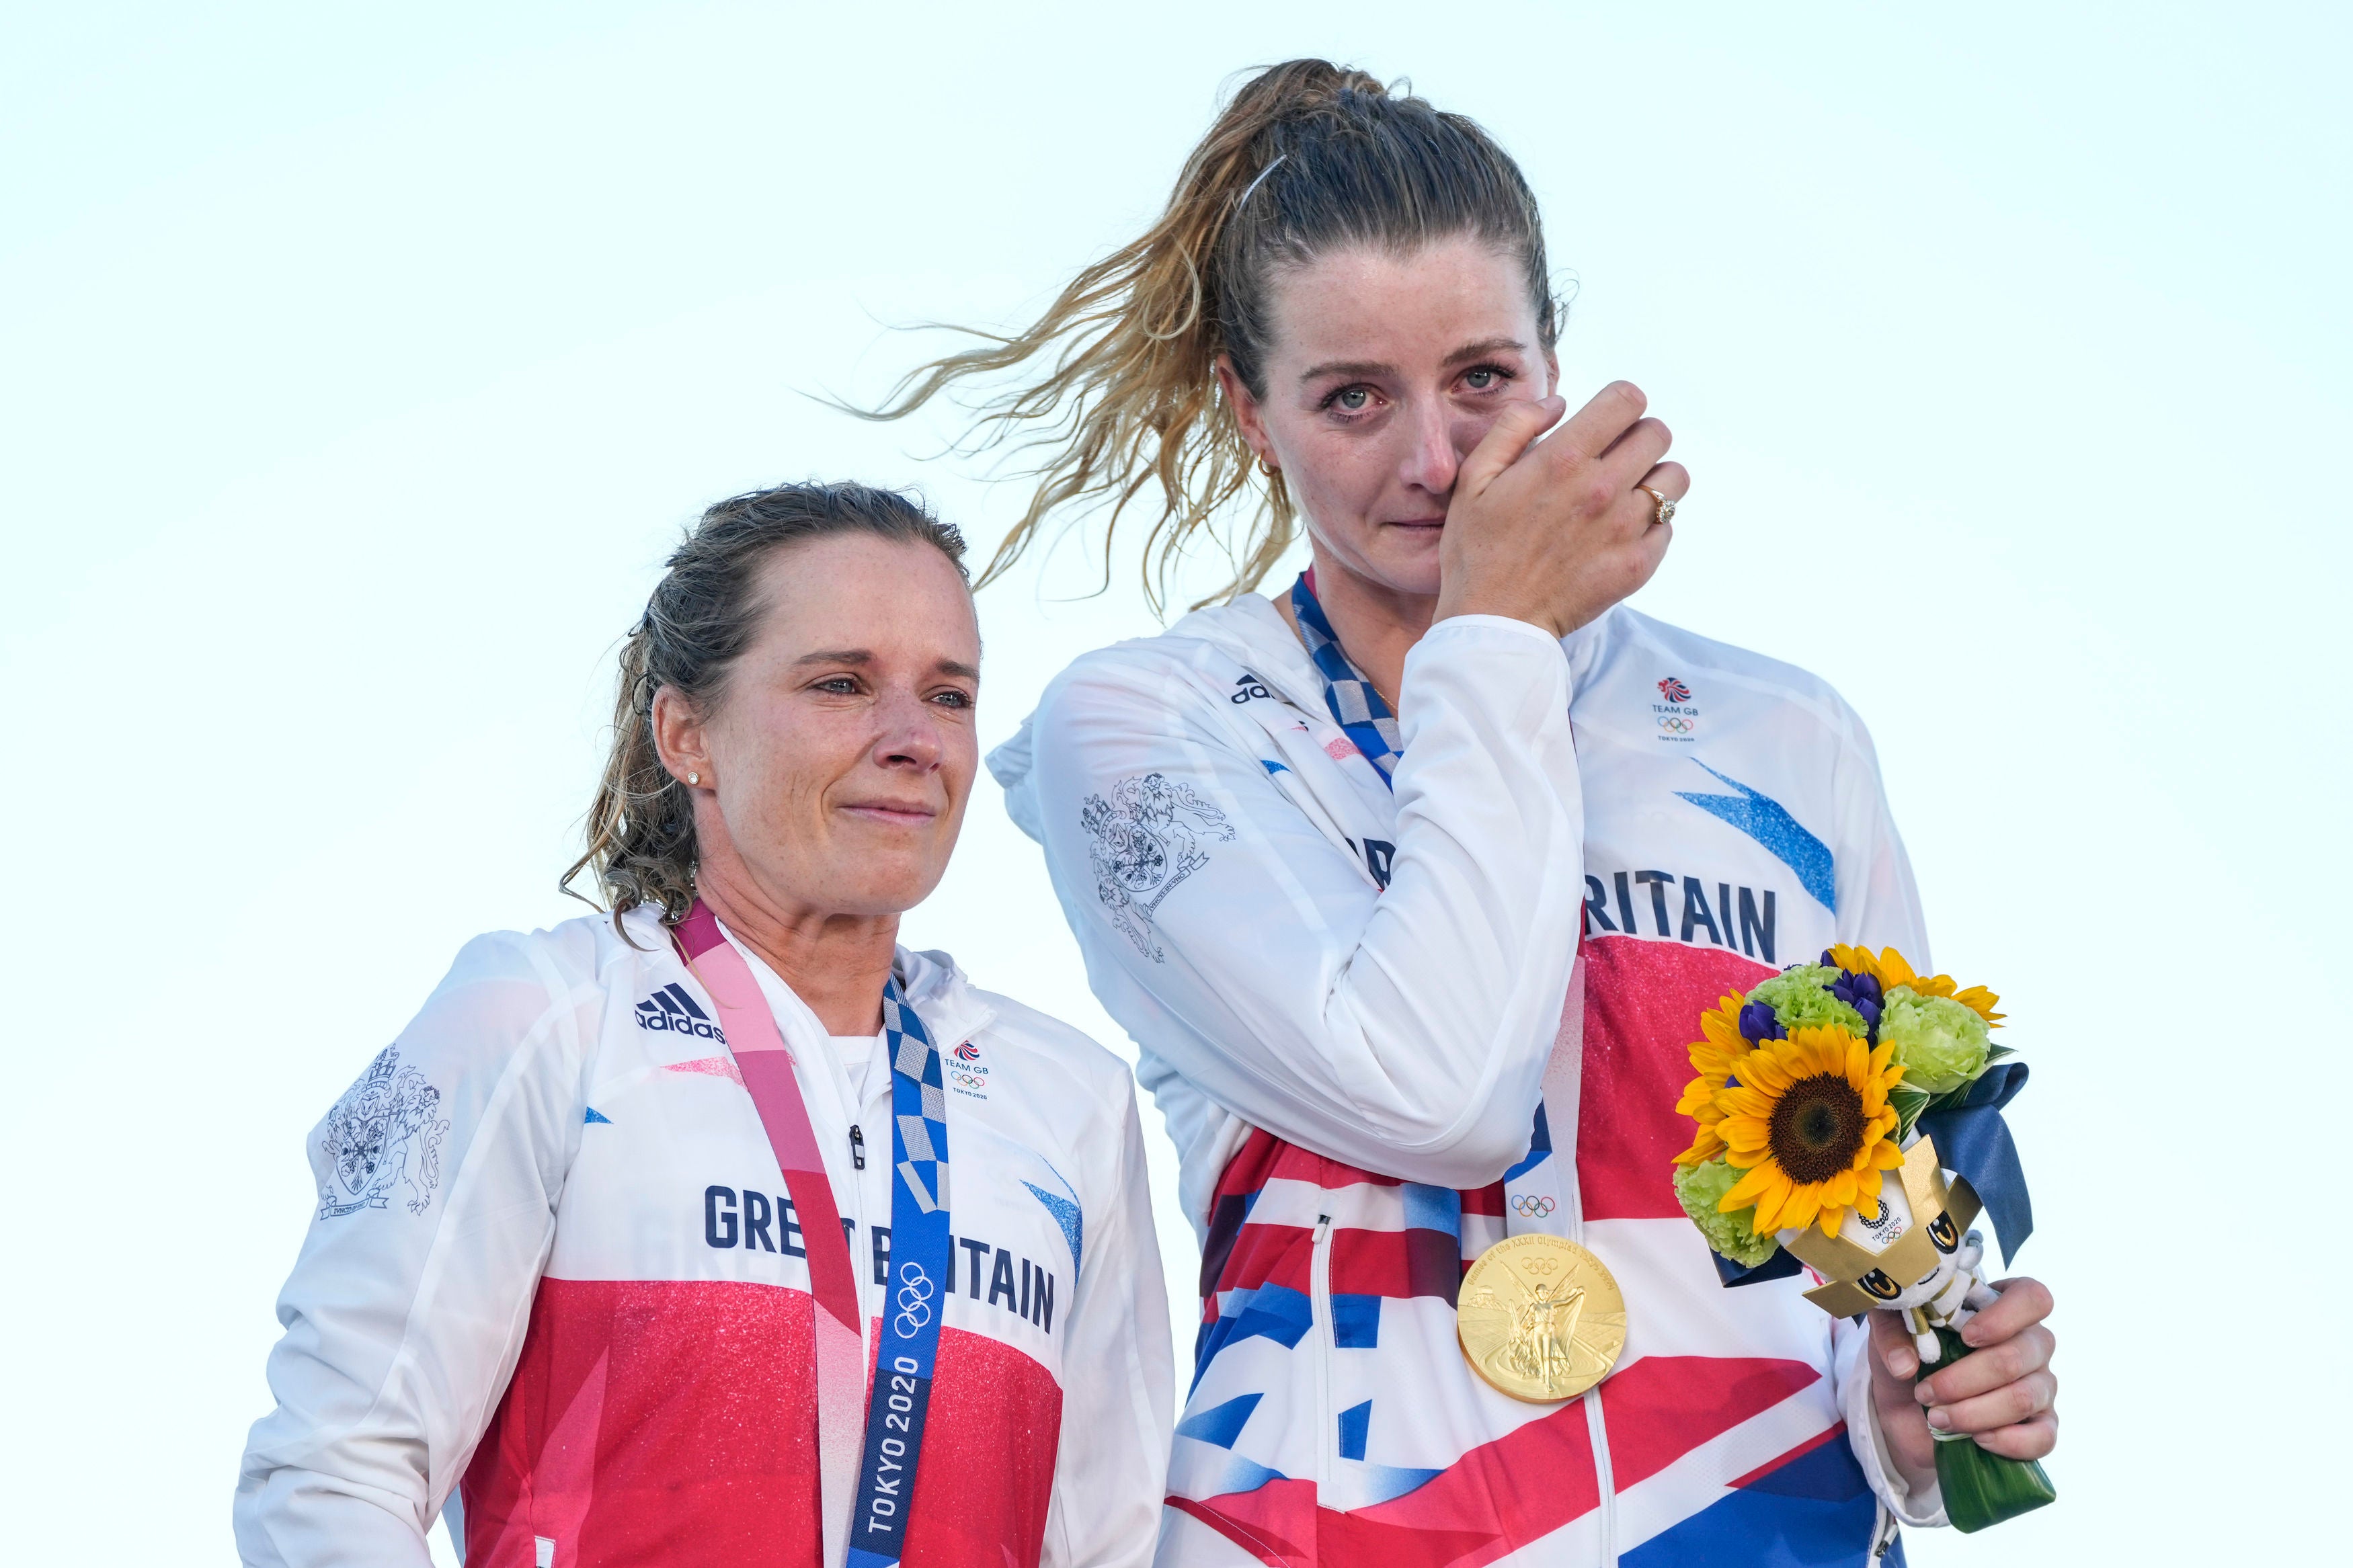 Great Britain’s Hannah Mills and Eilidh McIntyre dominated the field to win gold (AP Photo/Gregorio Borgia)